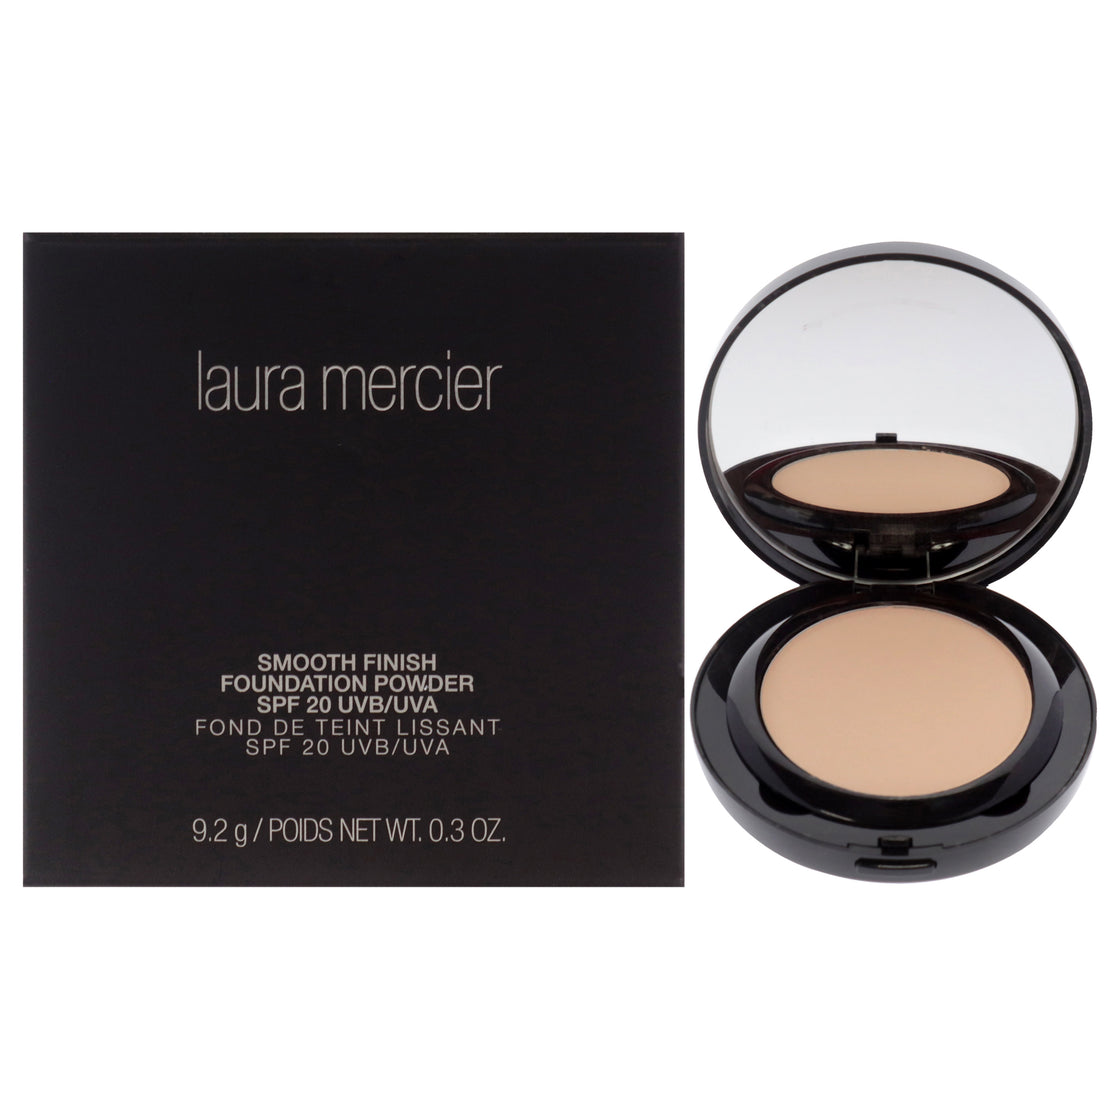 Smooth Finish Foundation Powder - 04 Light With Cool Undertones by Laura Mercier for Women - 0.3 oz Foundation